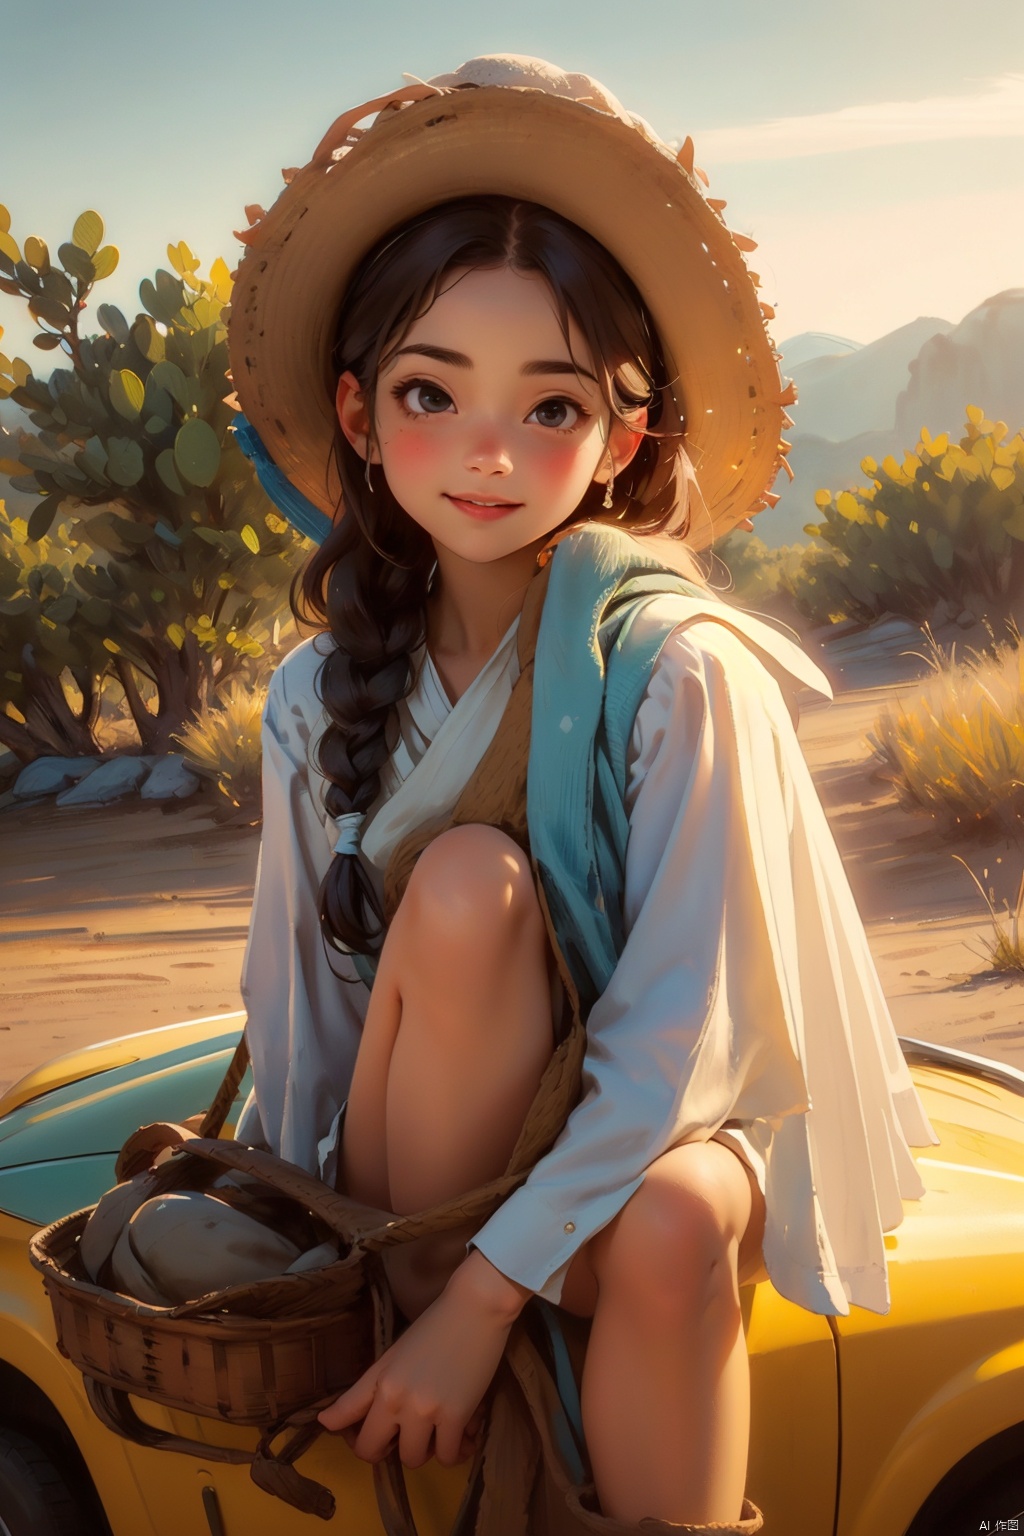 masterpiece, best quality, 8K,illustration, colorful, The rich visuals depict the joy of outdoor travel. car  Vacation girl, a girl White vest, This is a very thin girl, not very plump, Black Fried Dough Twists Braid and black eyes, Sitting on the ground with your back against a yellow car. Wearing a cowboy hat on the head , best qualityhighly detailed, realistic rendering, Cute Smiling Girl。This painting captures the essence of innocence, beauty, and joy, making it a beautiful and captivating artwork, Fully express the joy of the character's vacatin, The girl should be thinner, Girls' clothes should not be too revealing , Hair fluttering in the wind,Clearly display feet and hands